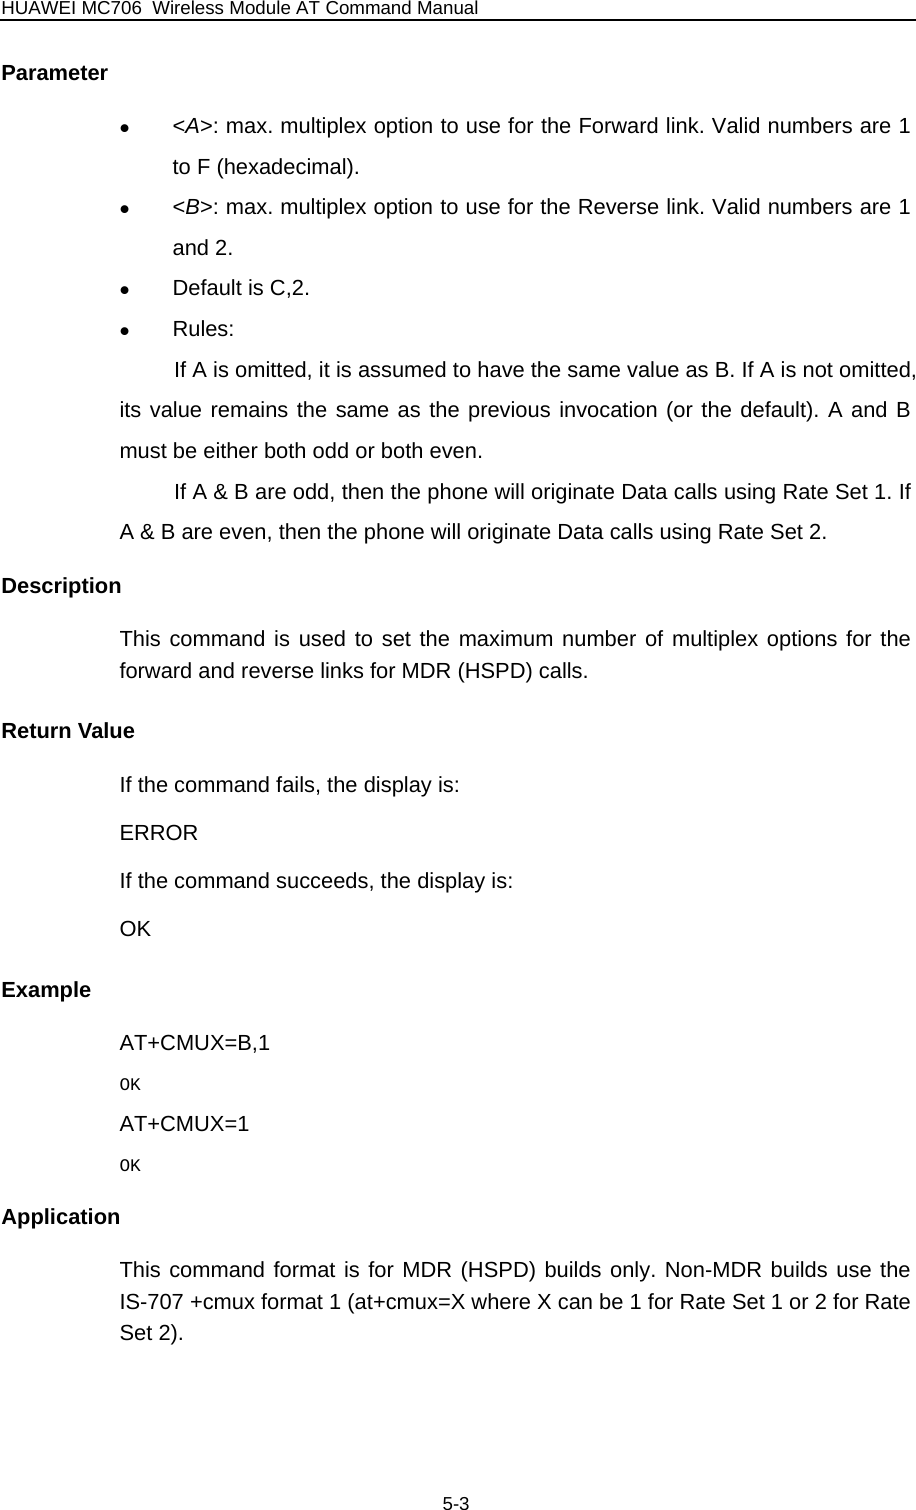 HUAWEI MC706 Wireless Module AT Command Manual Parameter z &lt;A&gt;: max. multiplex option to use for the Forward link. Valid numbers are 1 to F (hexadecimal). z &lt;B&gt;: max. multiplex option to use for the Reverse link. Valid numbers are 1 and 2.   z Default is C,2. z Rules:  If A is omitted, it is assumed to have the same value as B. If A is not omitted, its value remains the same as the previous invocation (or the default). A and B must be either both odd or both even. If A &amp; B are odd, then the phone will originate Data calls using Rate Set 1. If A &amp; B are even, then the phone will originate Data calls using Rate Set 2. Description This command is used to set the maximum number of multiplex options for the forward and reverse links for MDR (HSPD) calls. Return Value If the command fails, the display is: ERROR If the command succeeds, the display is: OK Example AT+CMUX=B,1 OK AT+CMUX=1 OK Application This command format is for MDR (HSPD) builds only. Non-MDR builds use the IS-707 +cmux format 1 (at+cmux=X where X can be 1 for Rate Set 1 or 2 for Rate Set 2). 5-3 